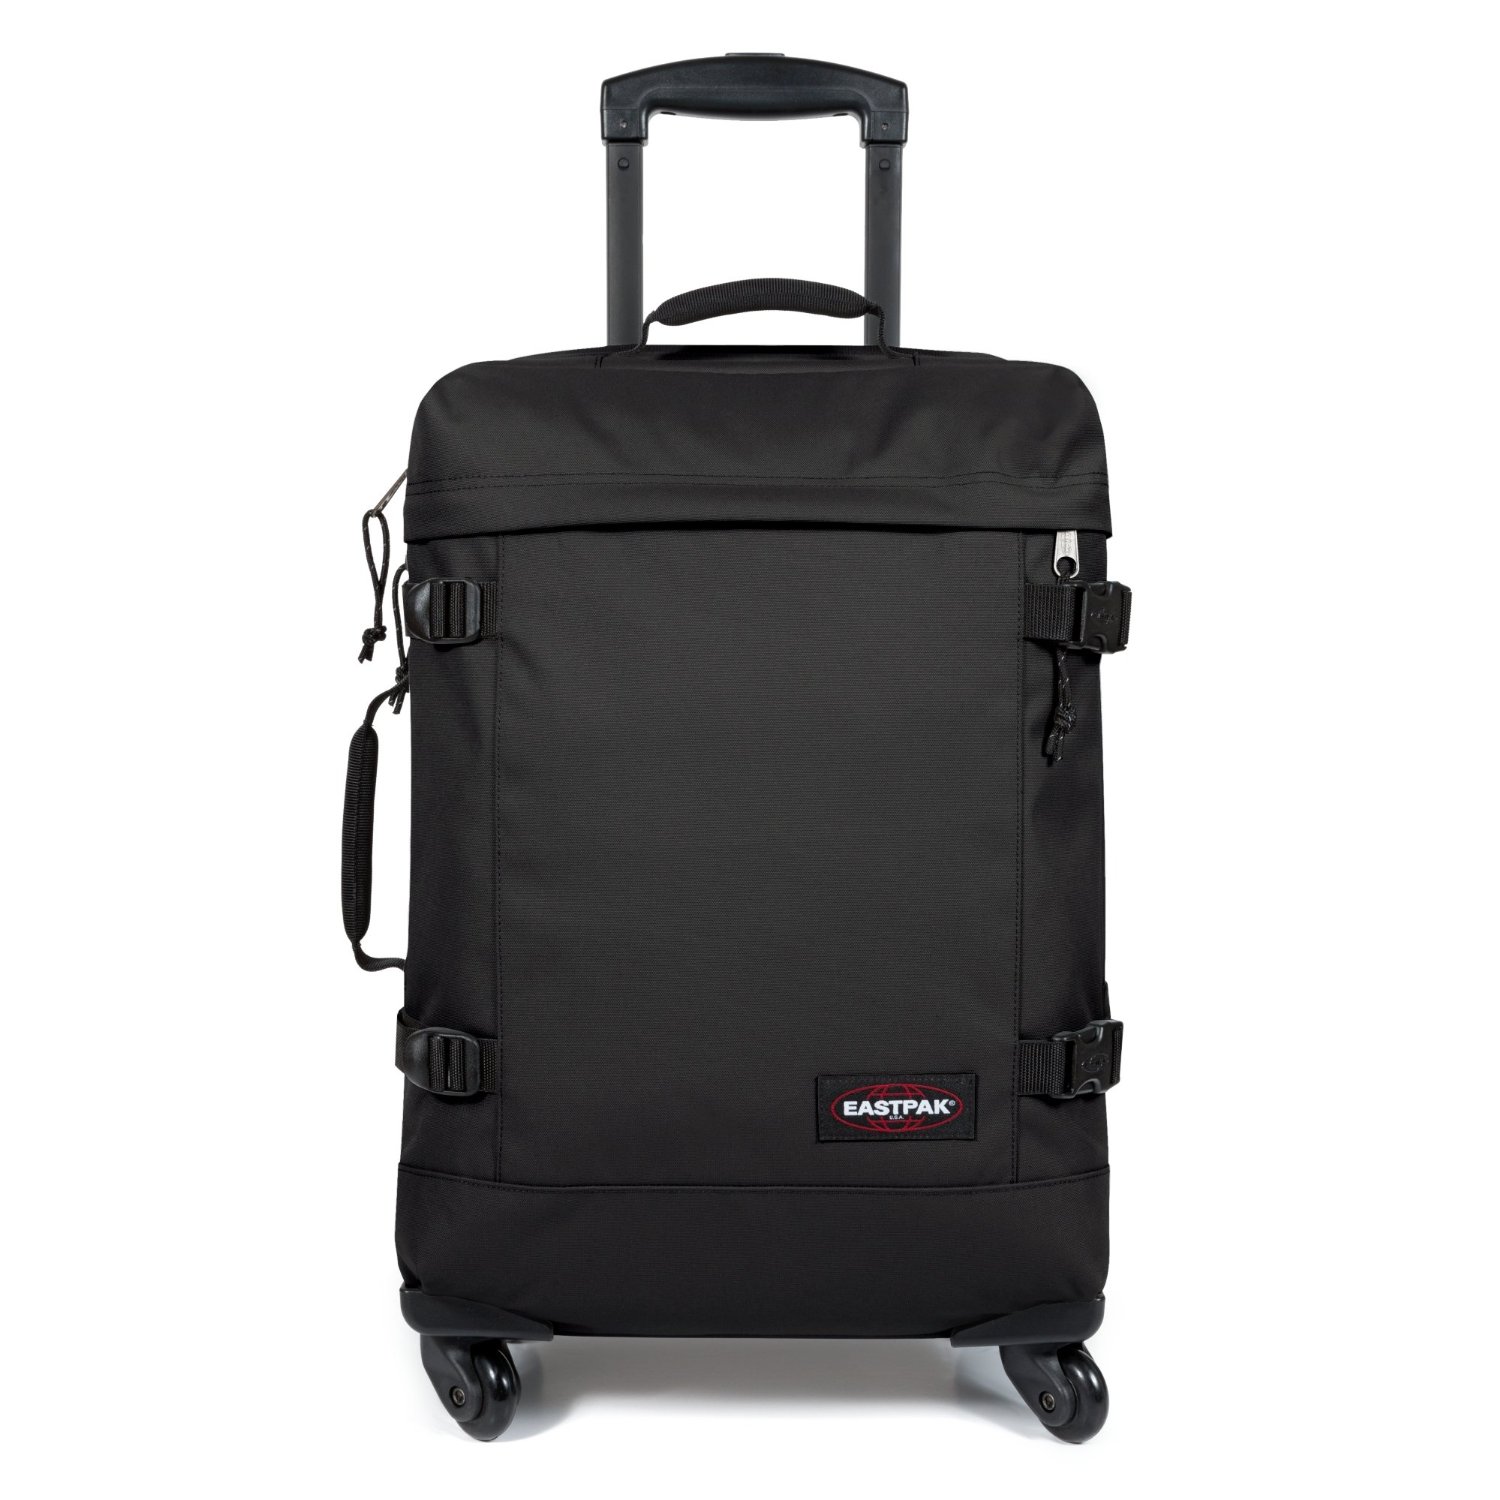 eastpak-trans-best-cabin-luggage - Cabin Hand Luggage